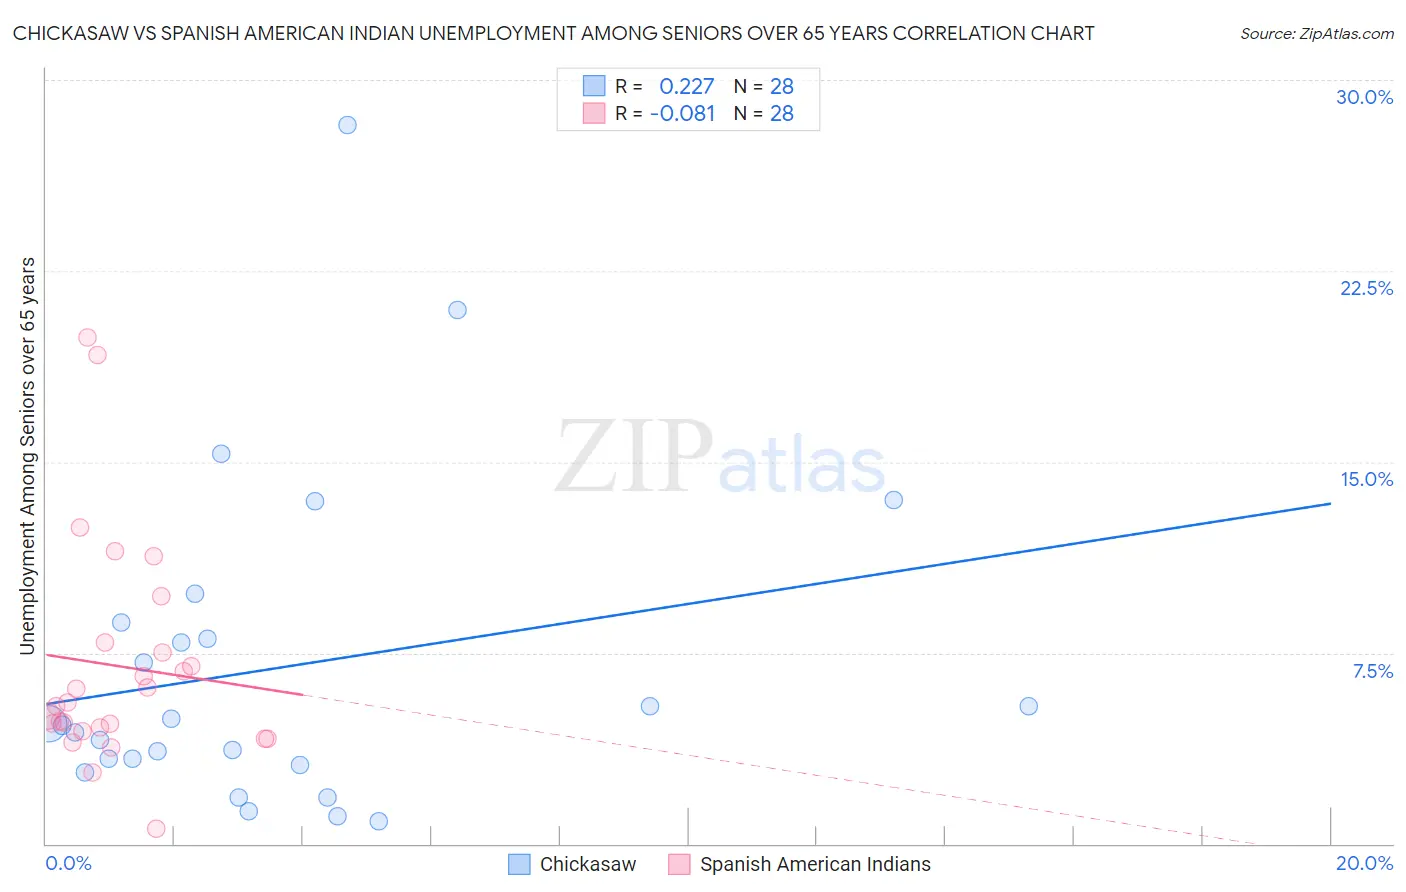 Chickasaw vs Spanish American Indian Unemployment Among Seniors over 65 years